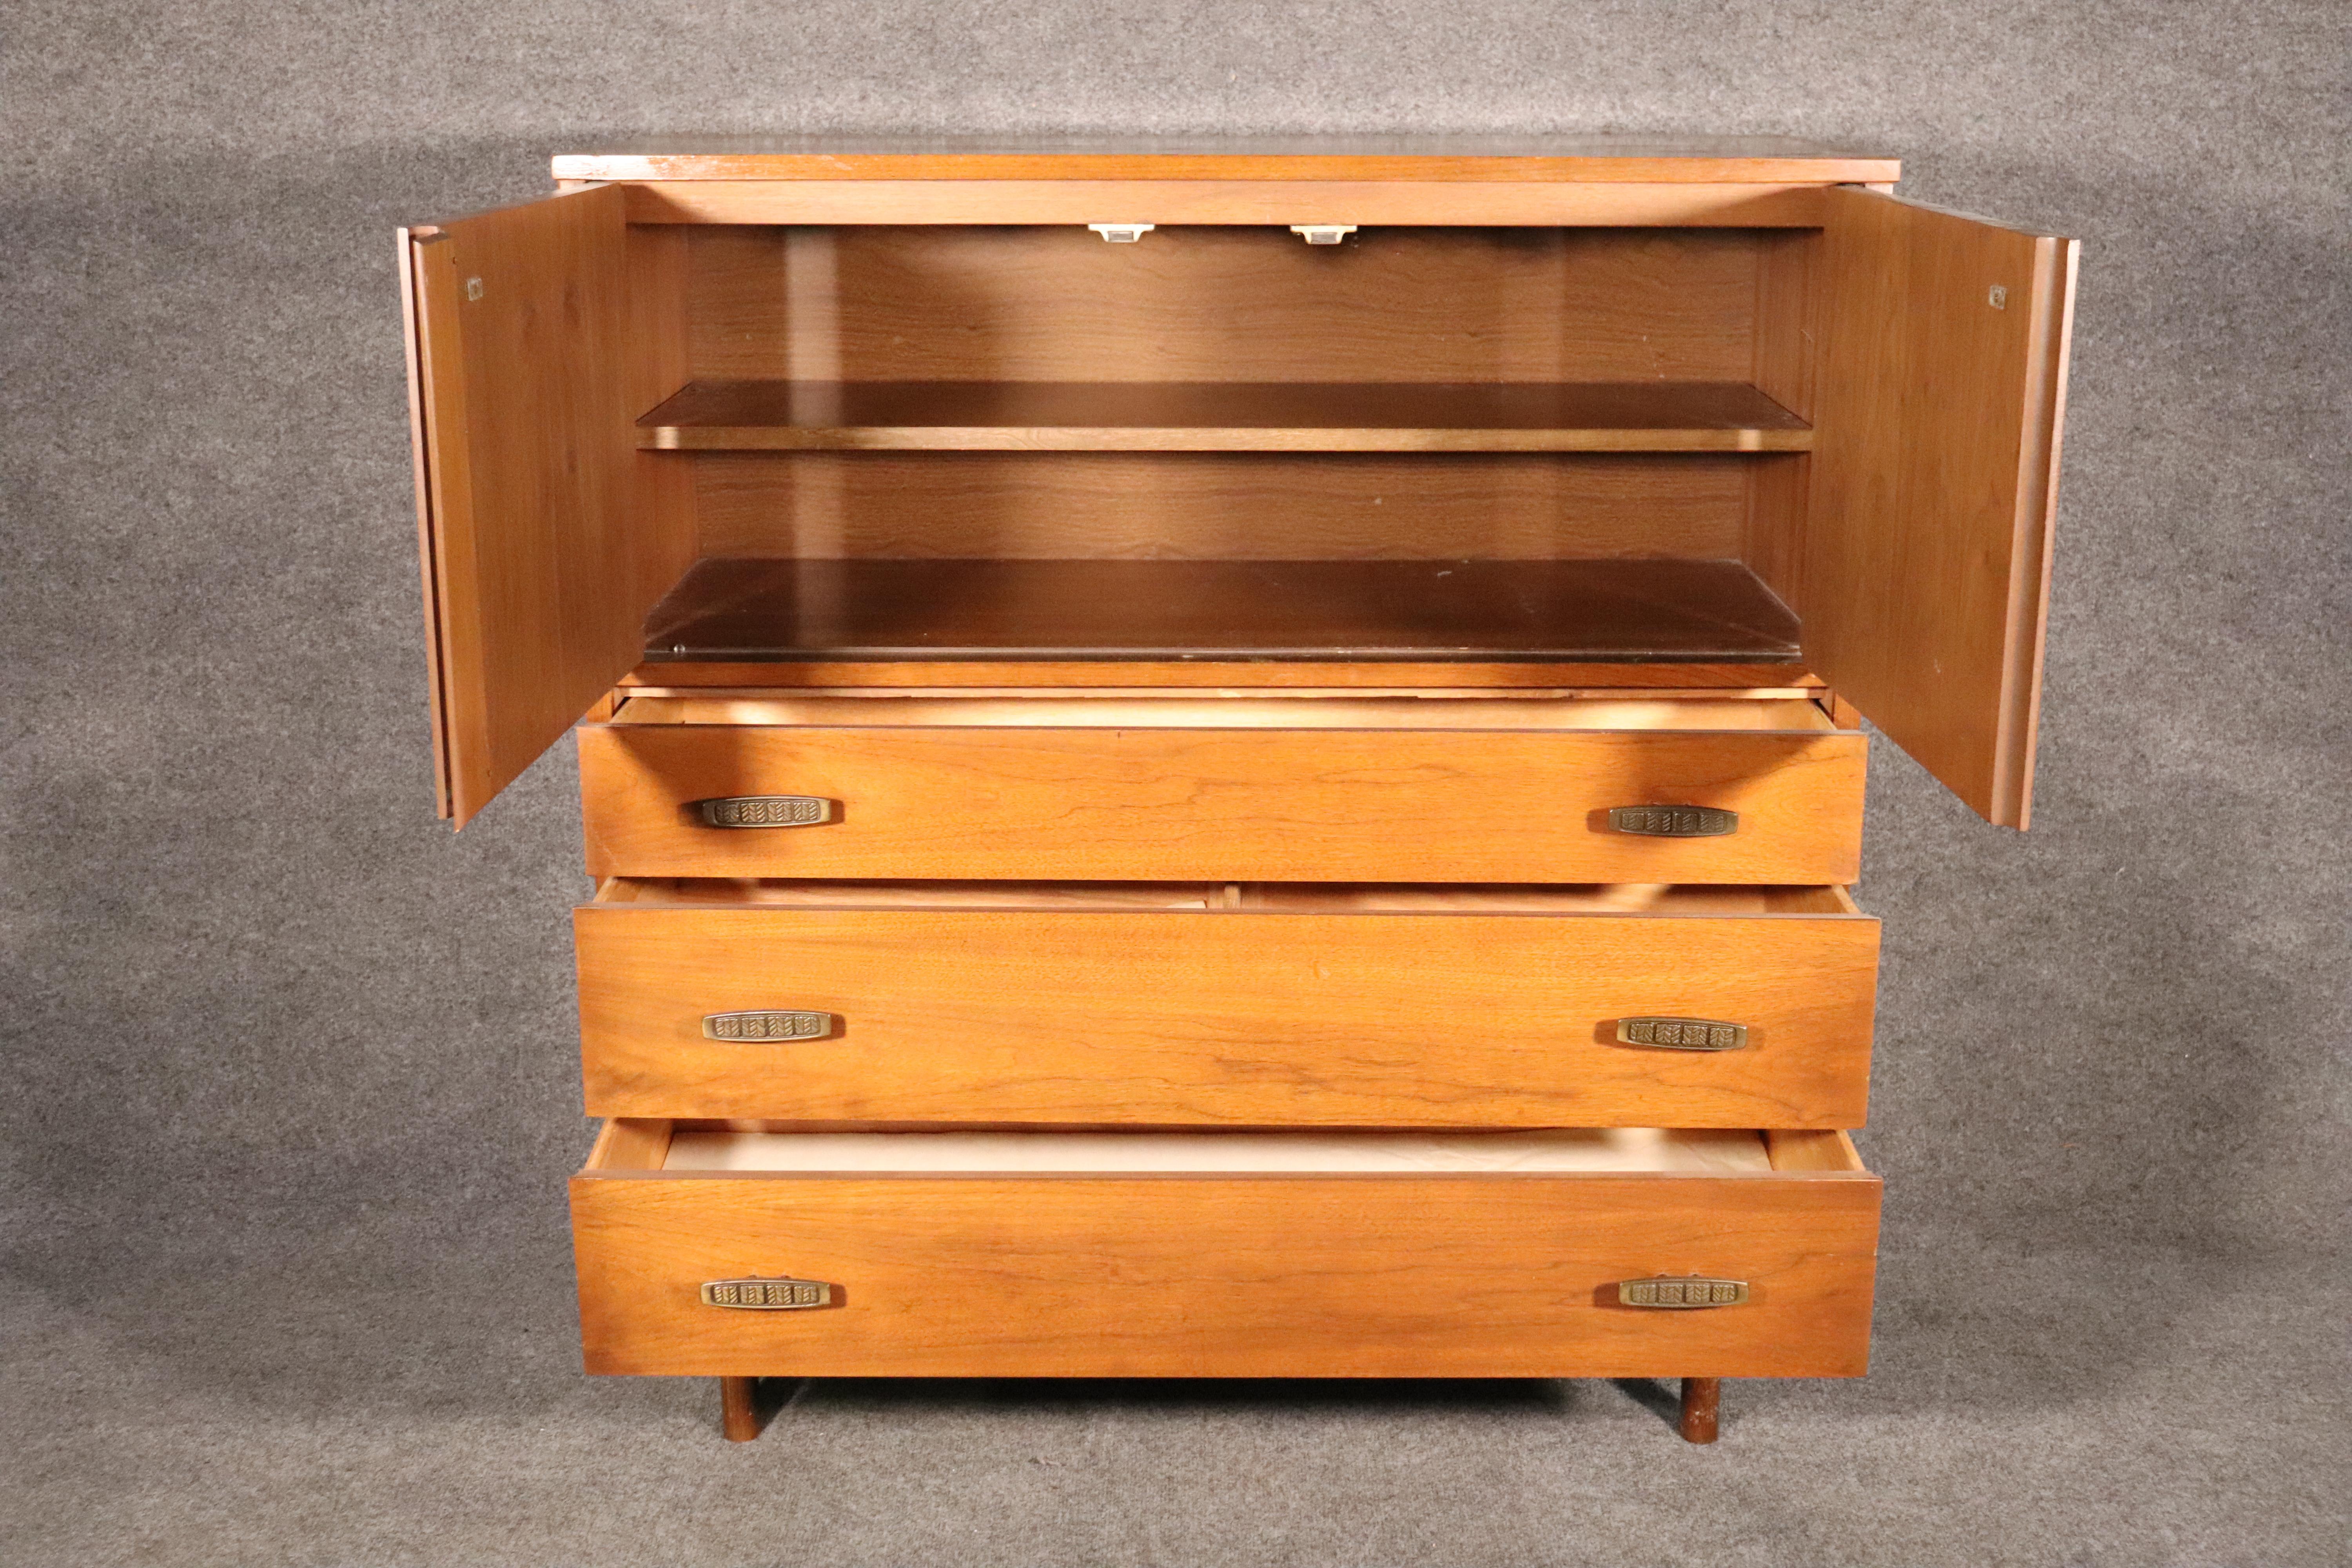 Tall chest of drawers designed by Pierre Debs for Bassett furniture. Rich walnut with brass hardware. Three wide drawers and top chest.
Please confirm location.